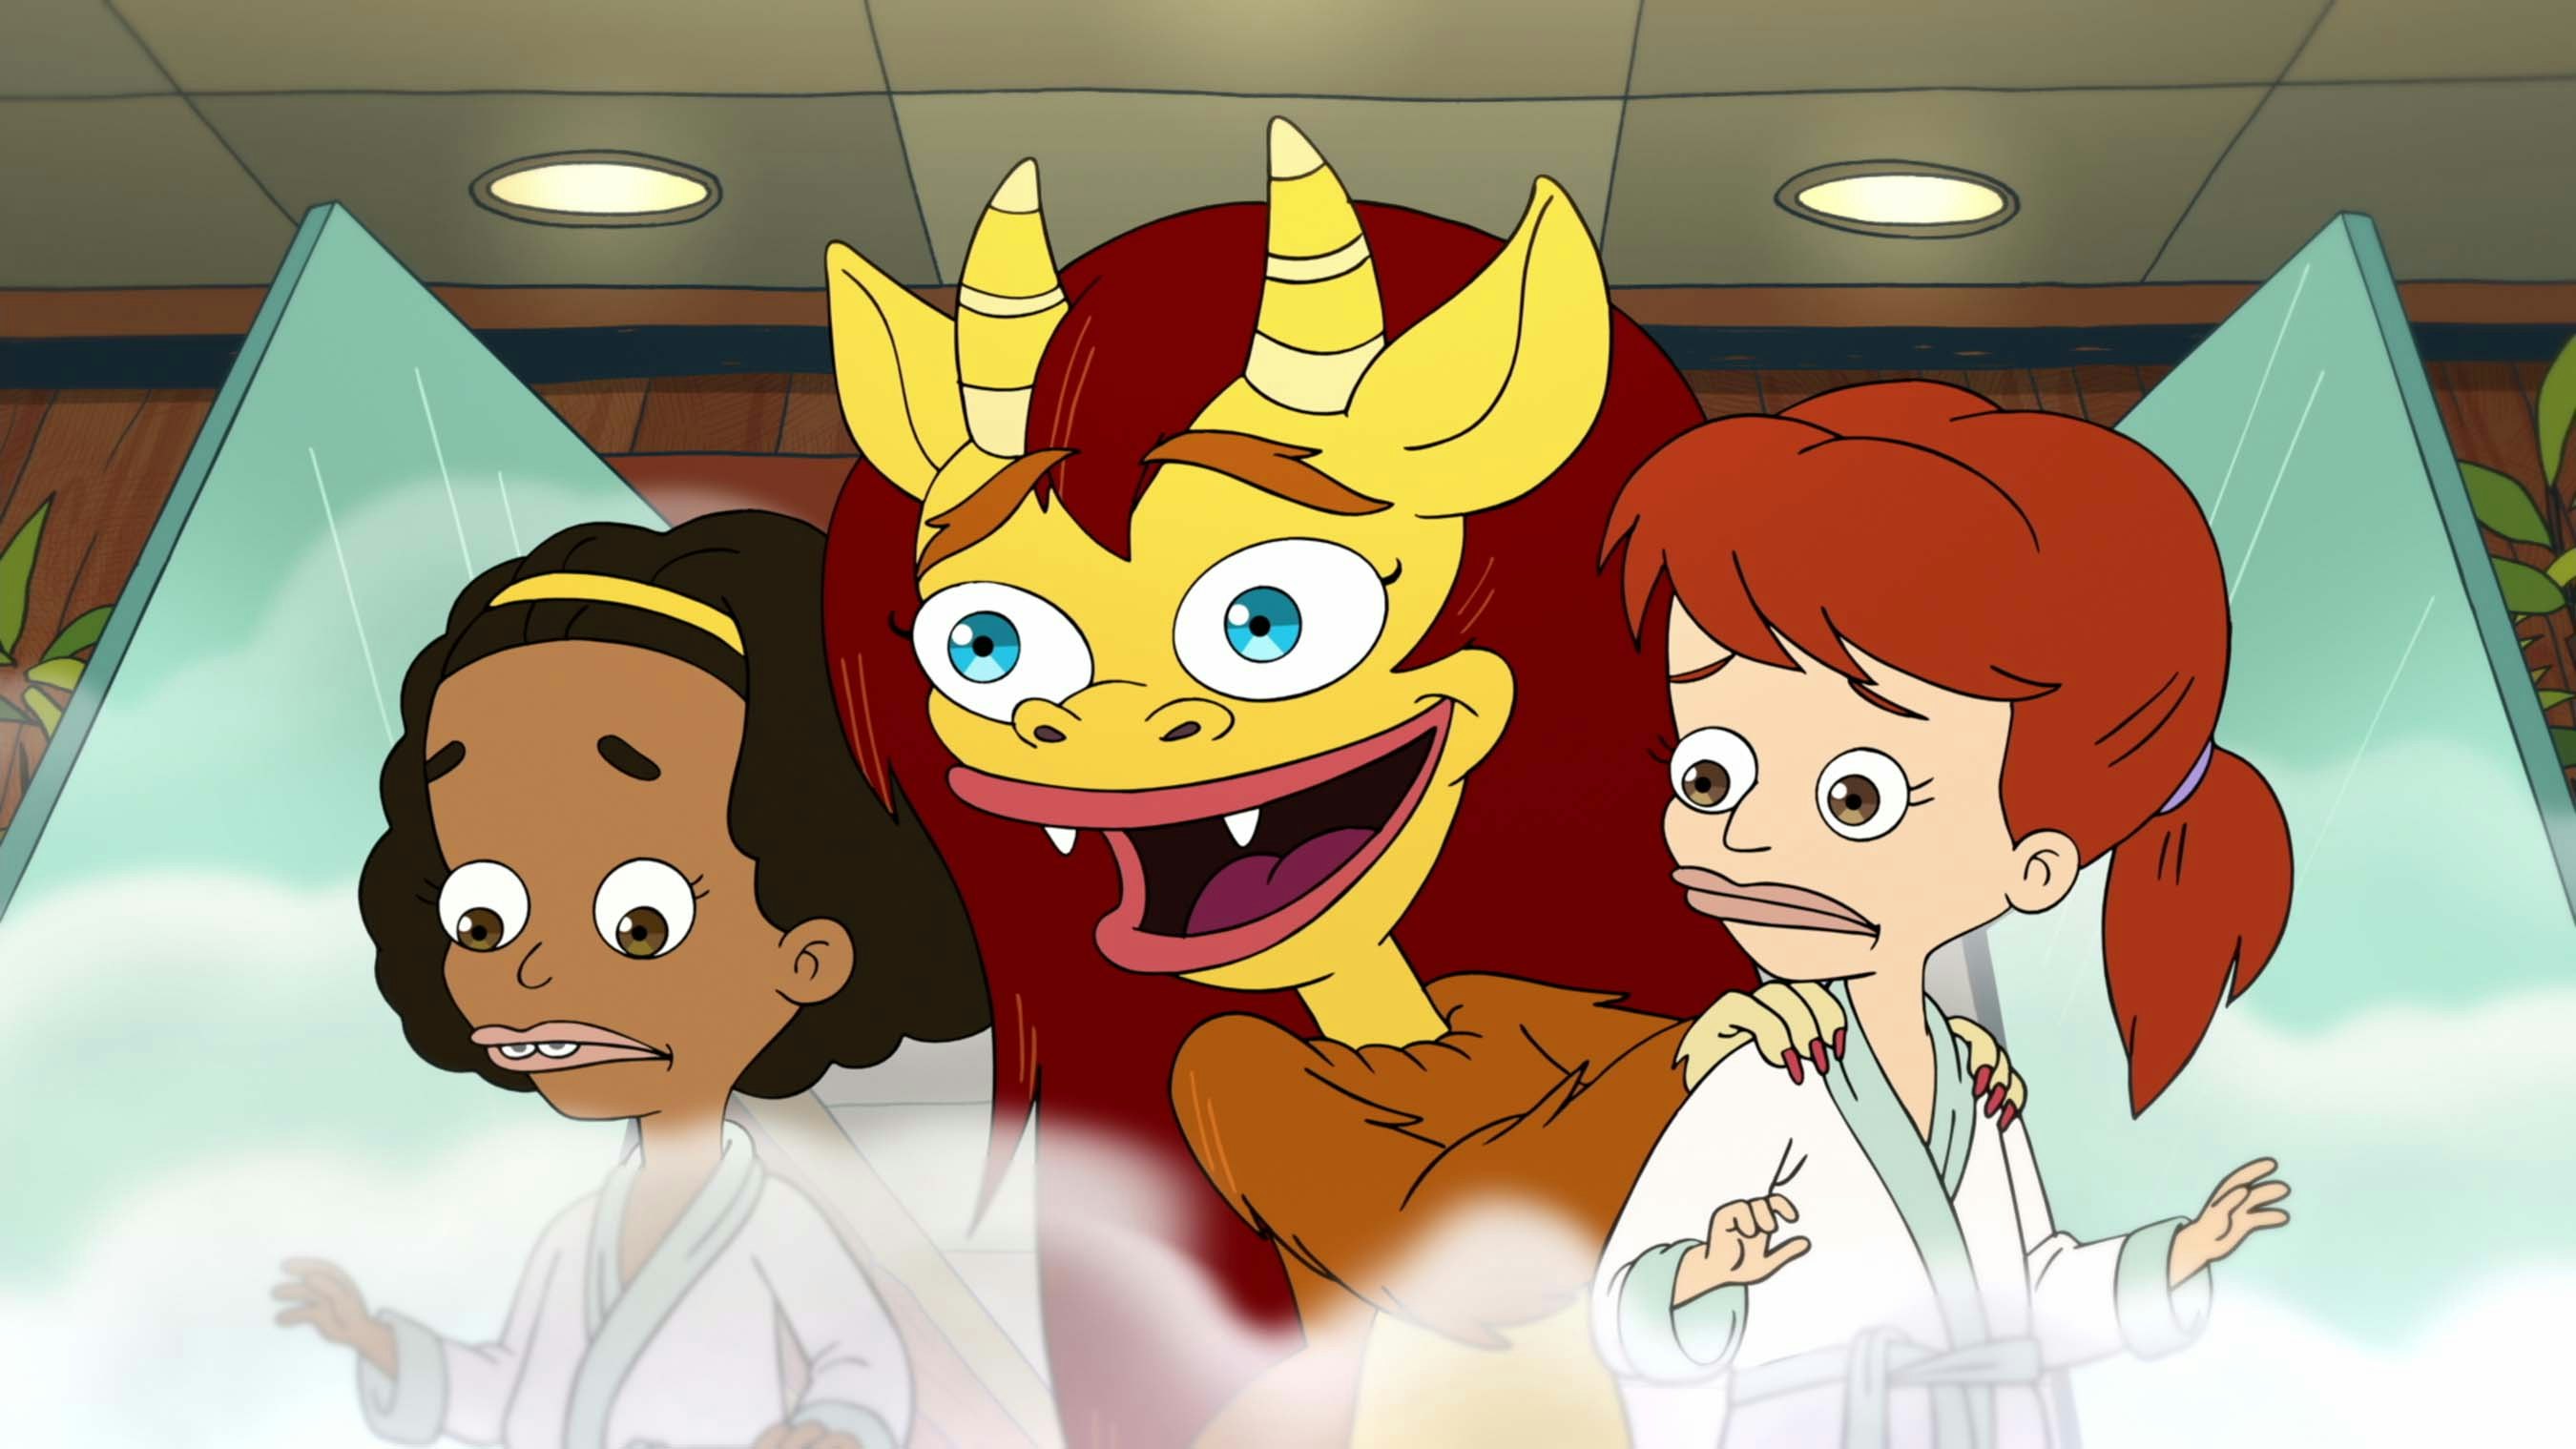 Big Mouth Cartoon Porn - Big Mouth' Season 4 release date, plot, characters, and more